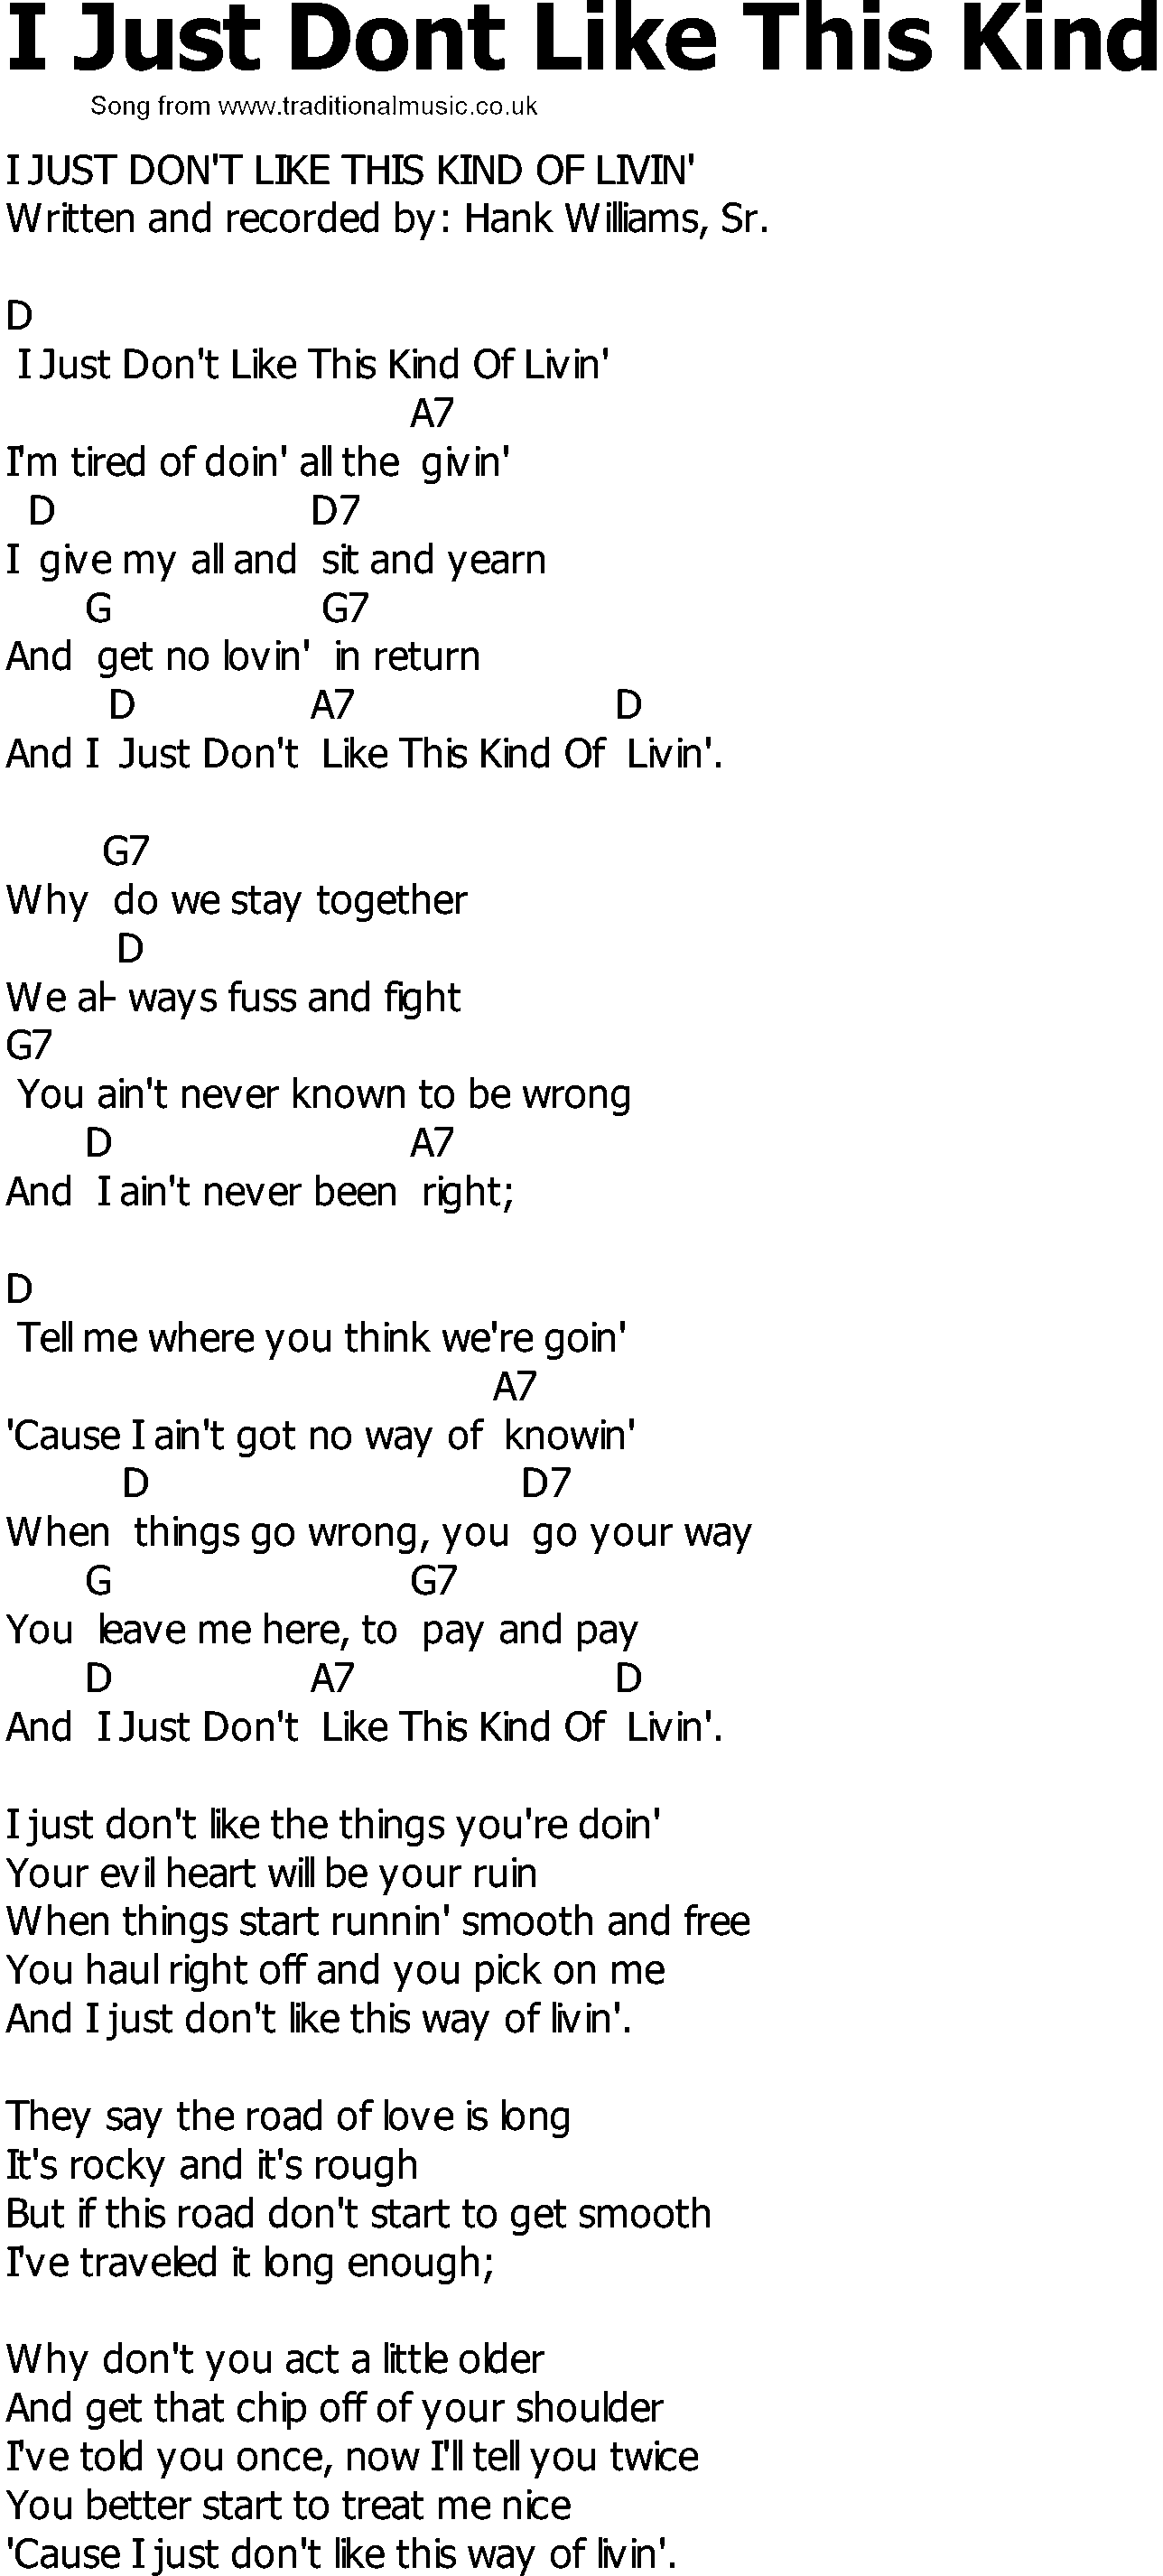 Old Country song lyrics with chords - I Just Dont Like This Kind